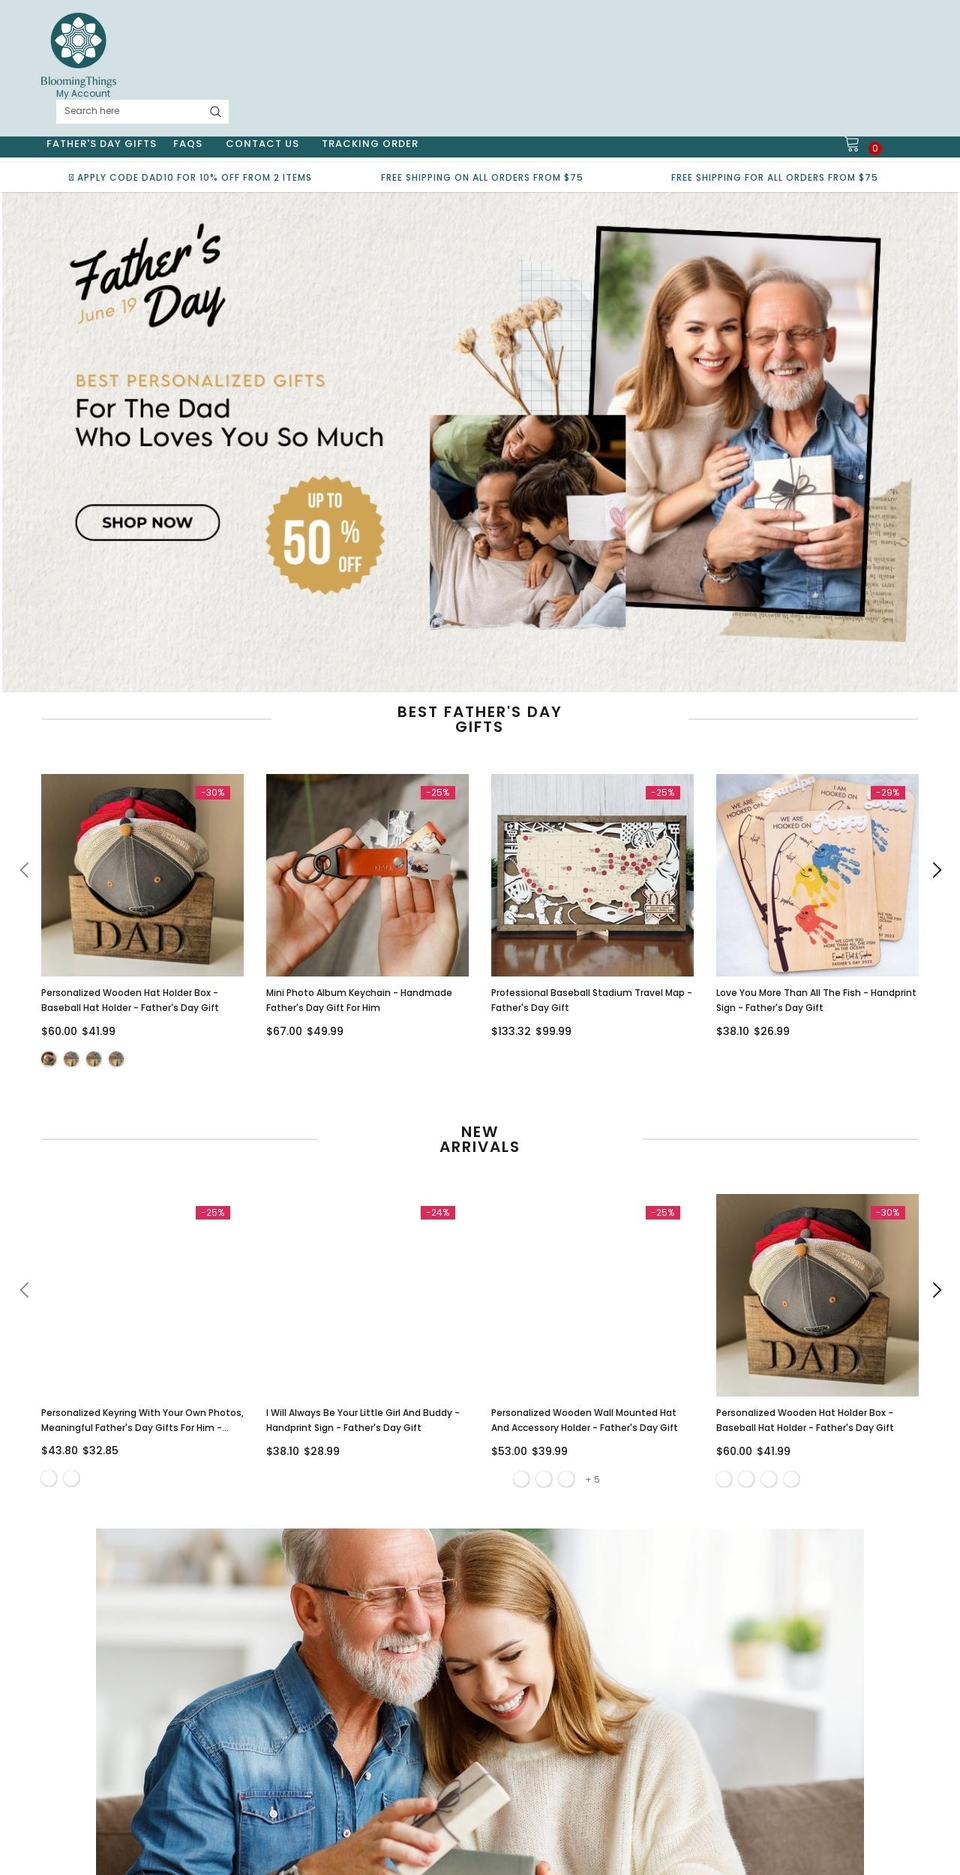 Gifts Shopify theme site example lelysa.com